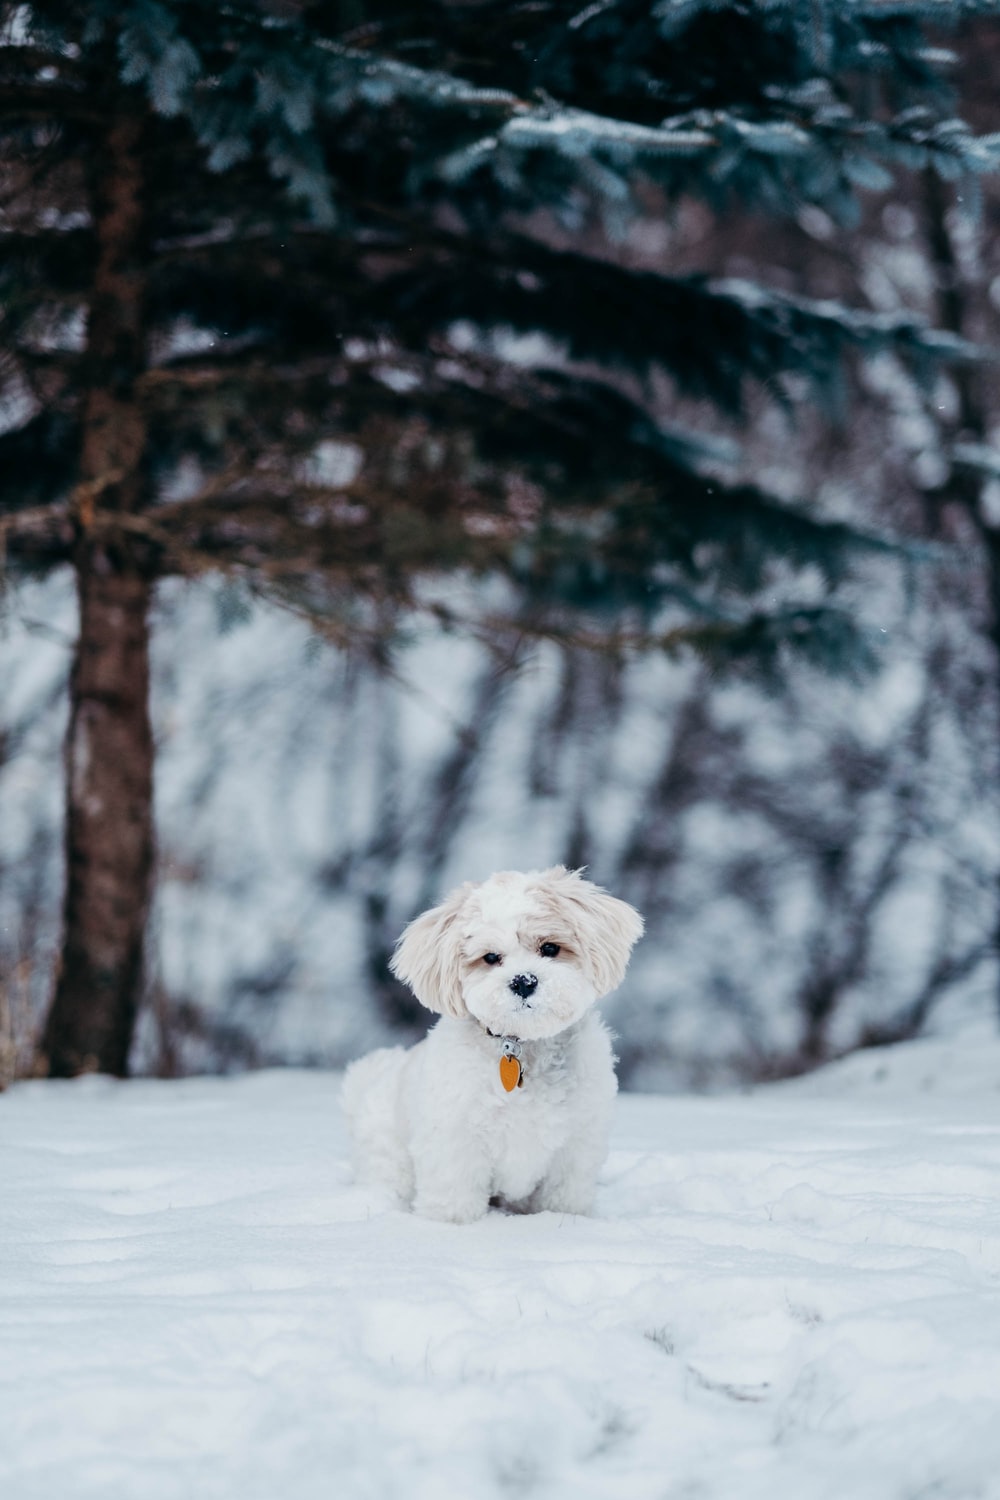 Dog In Snow Picture. Download Free Image